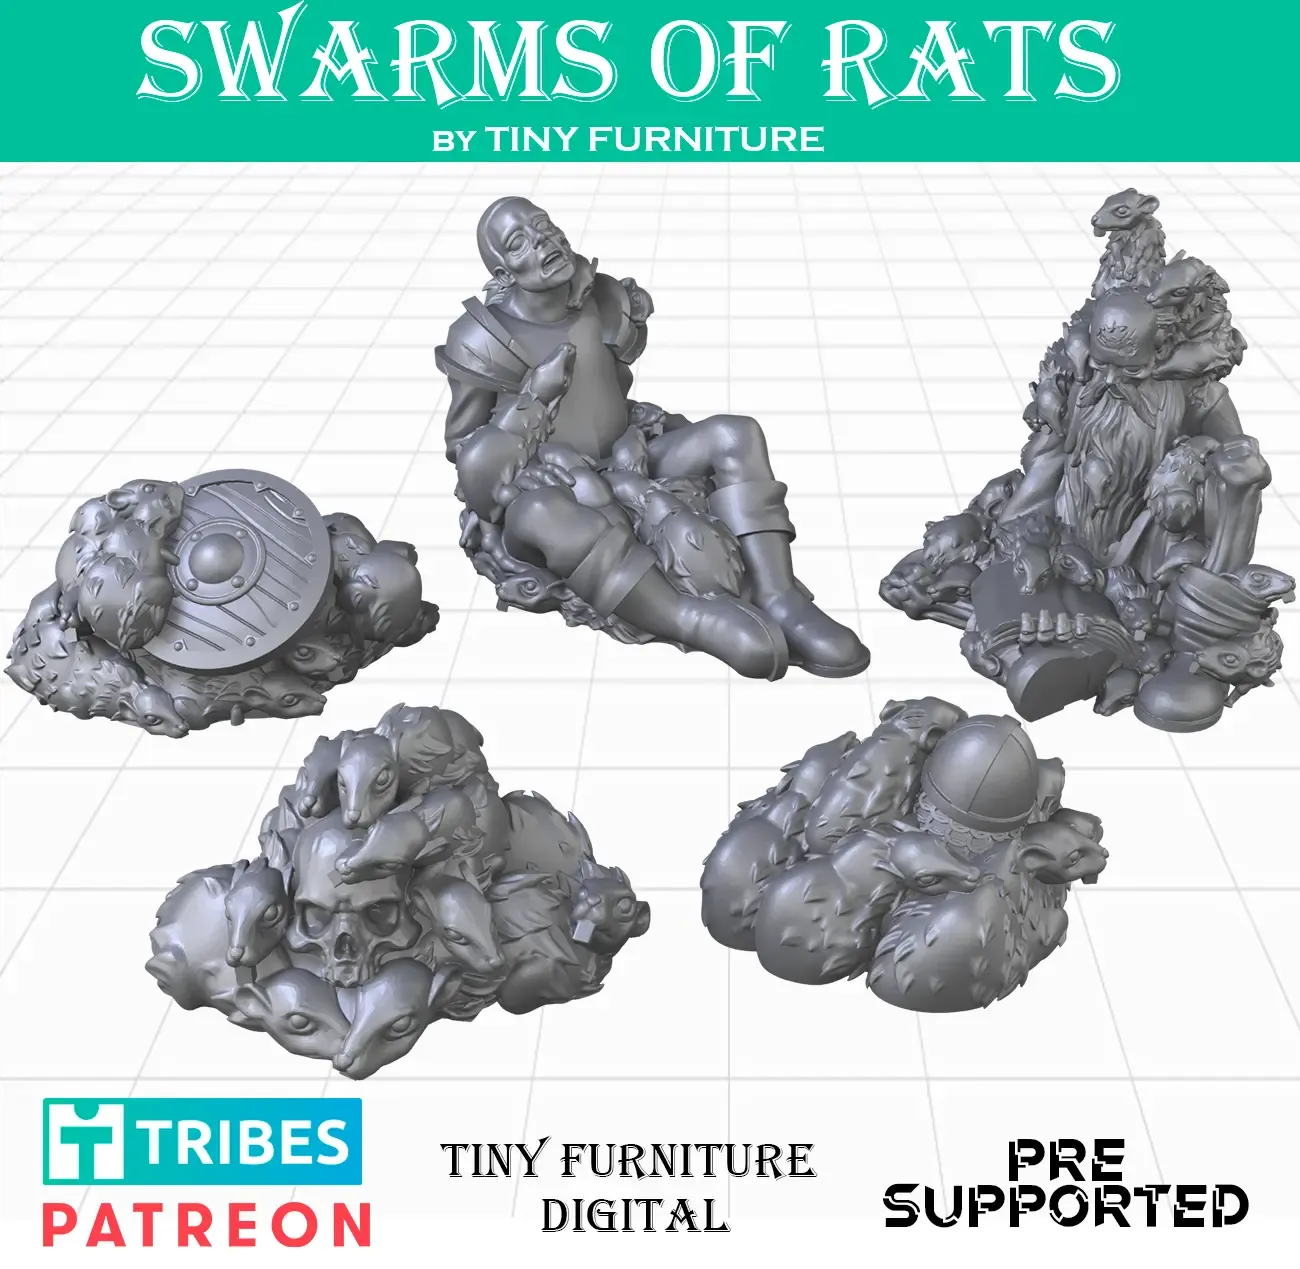 Swarms of rats (Harvest of War)